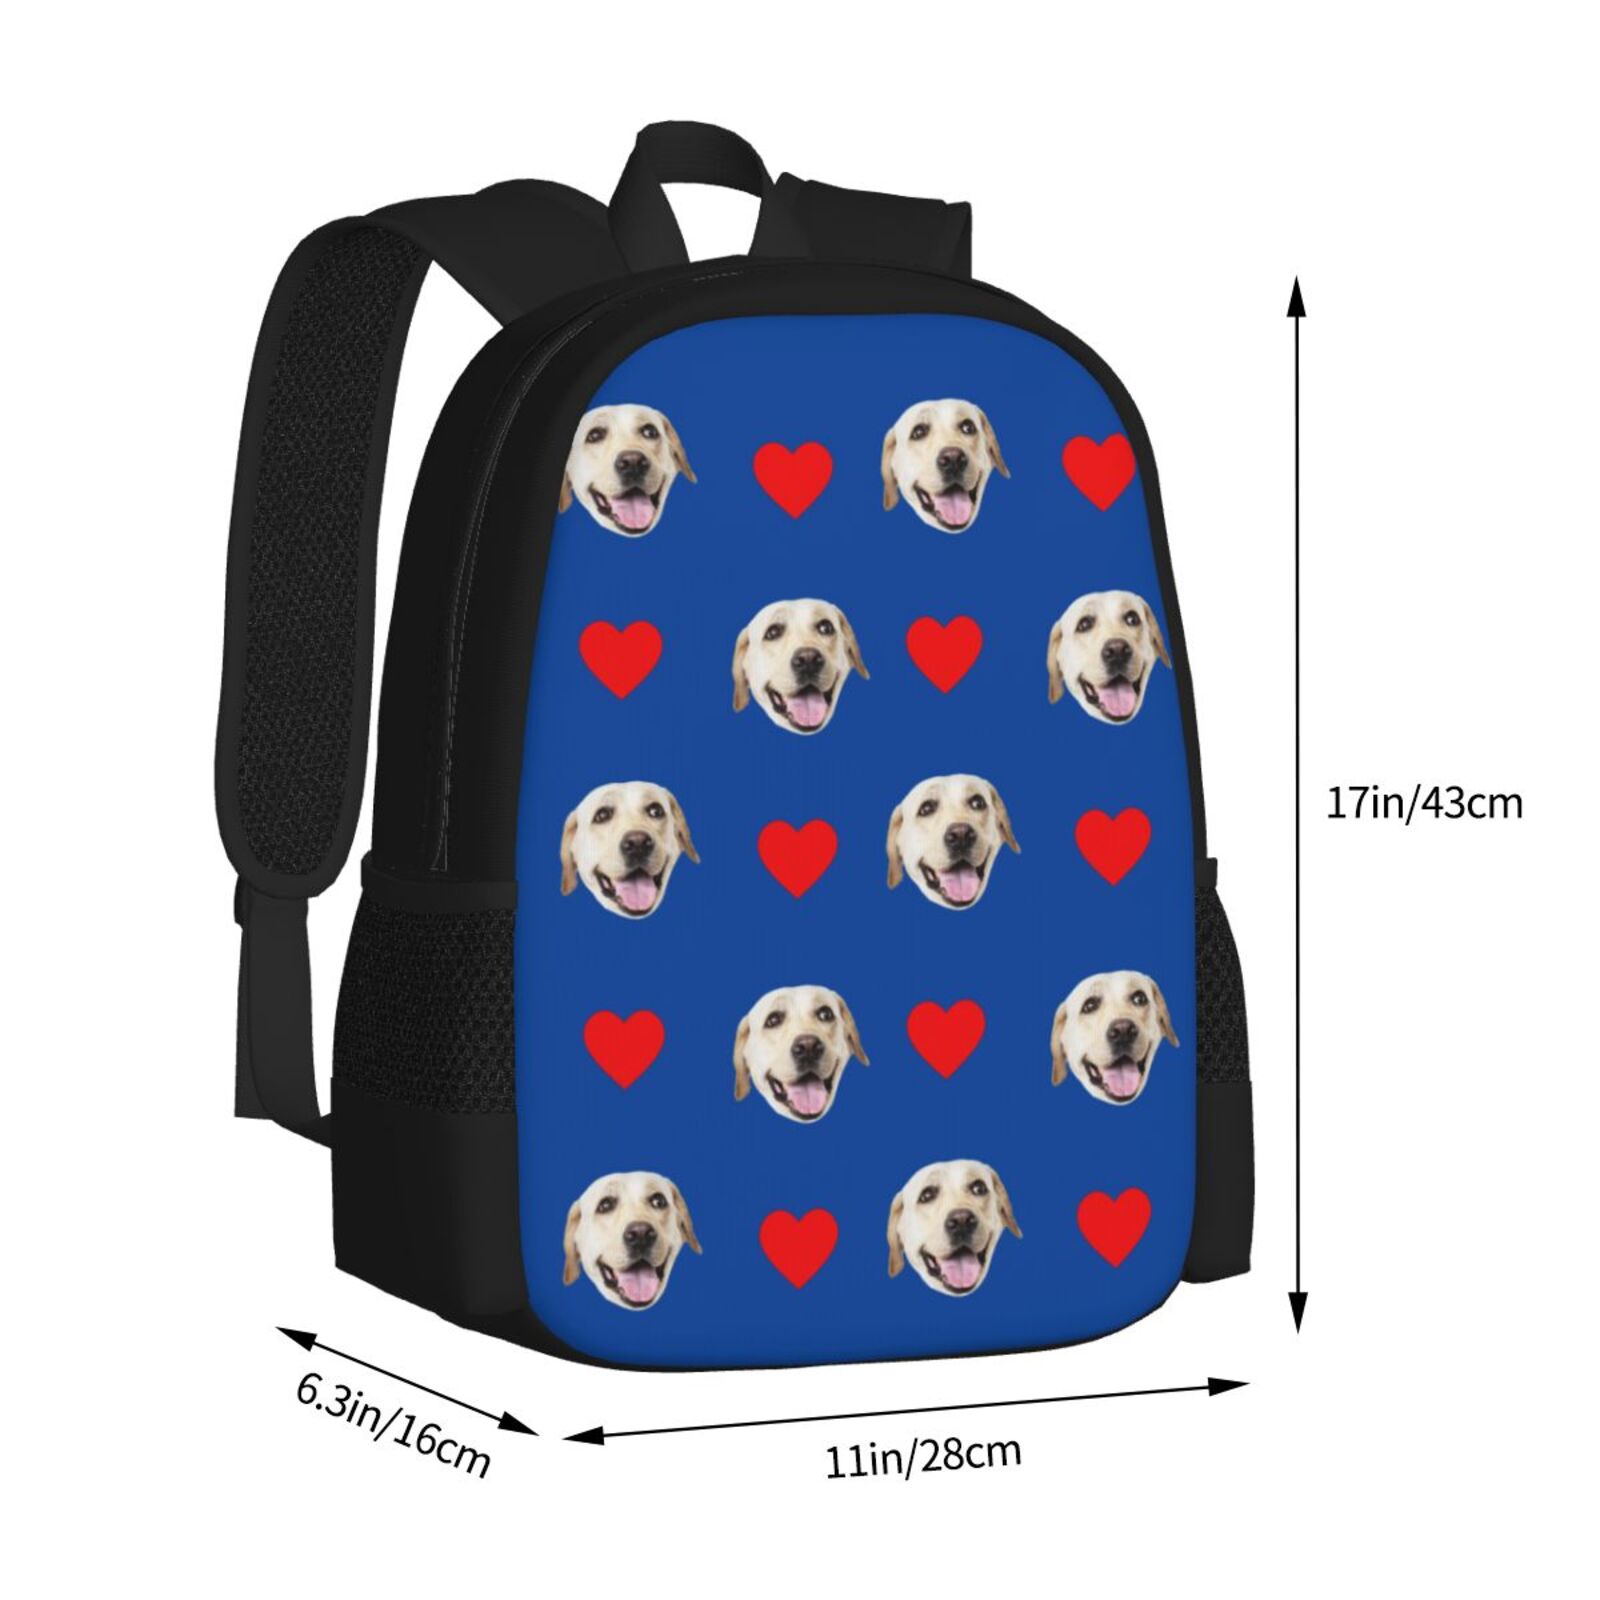 Custom Dog Face Backpack With Heart